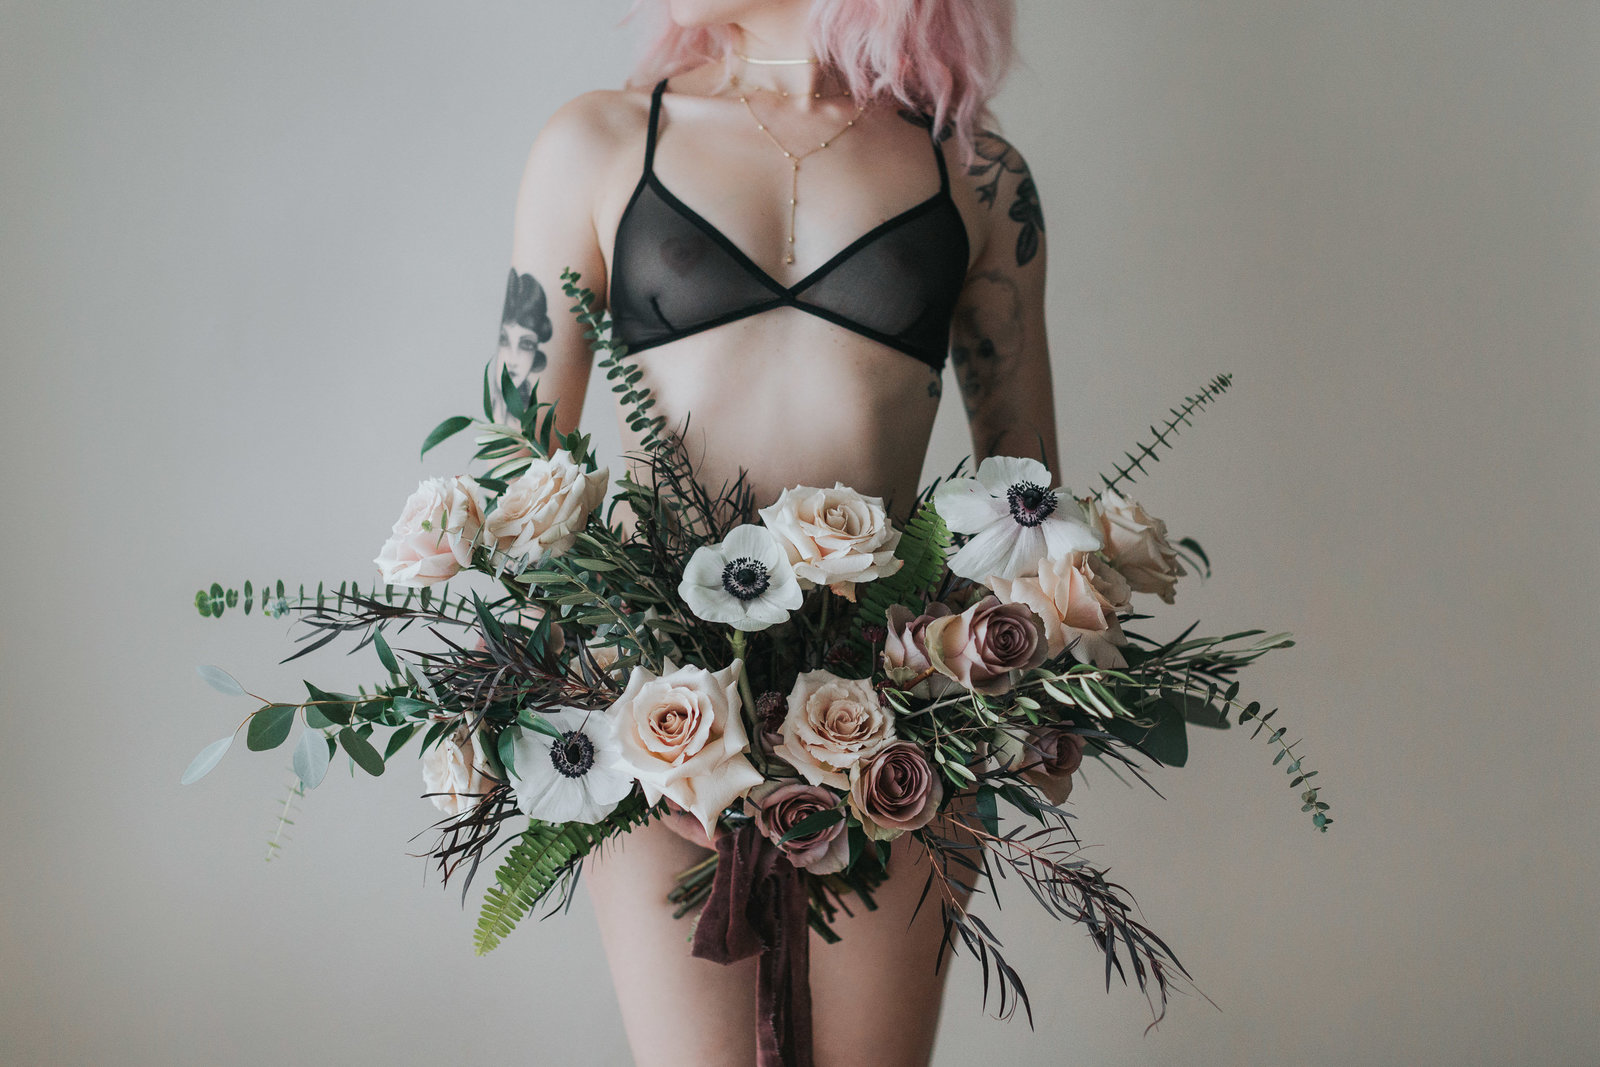 Girl in lingerie holding bouquet of flowers